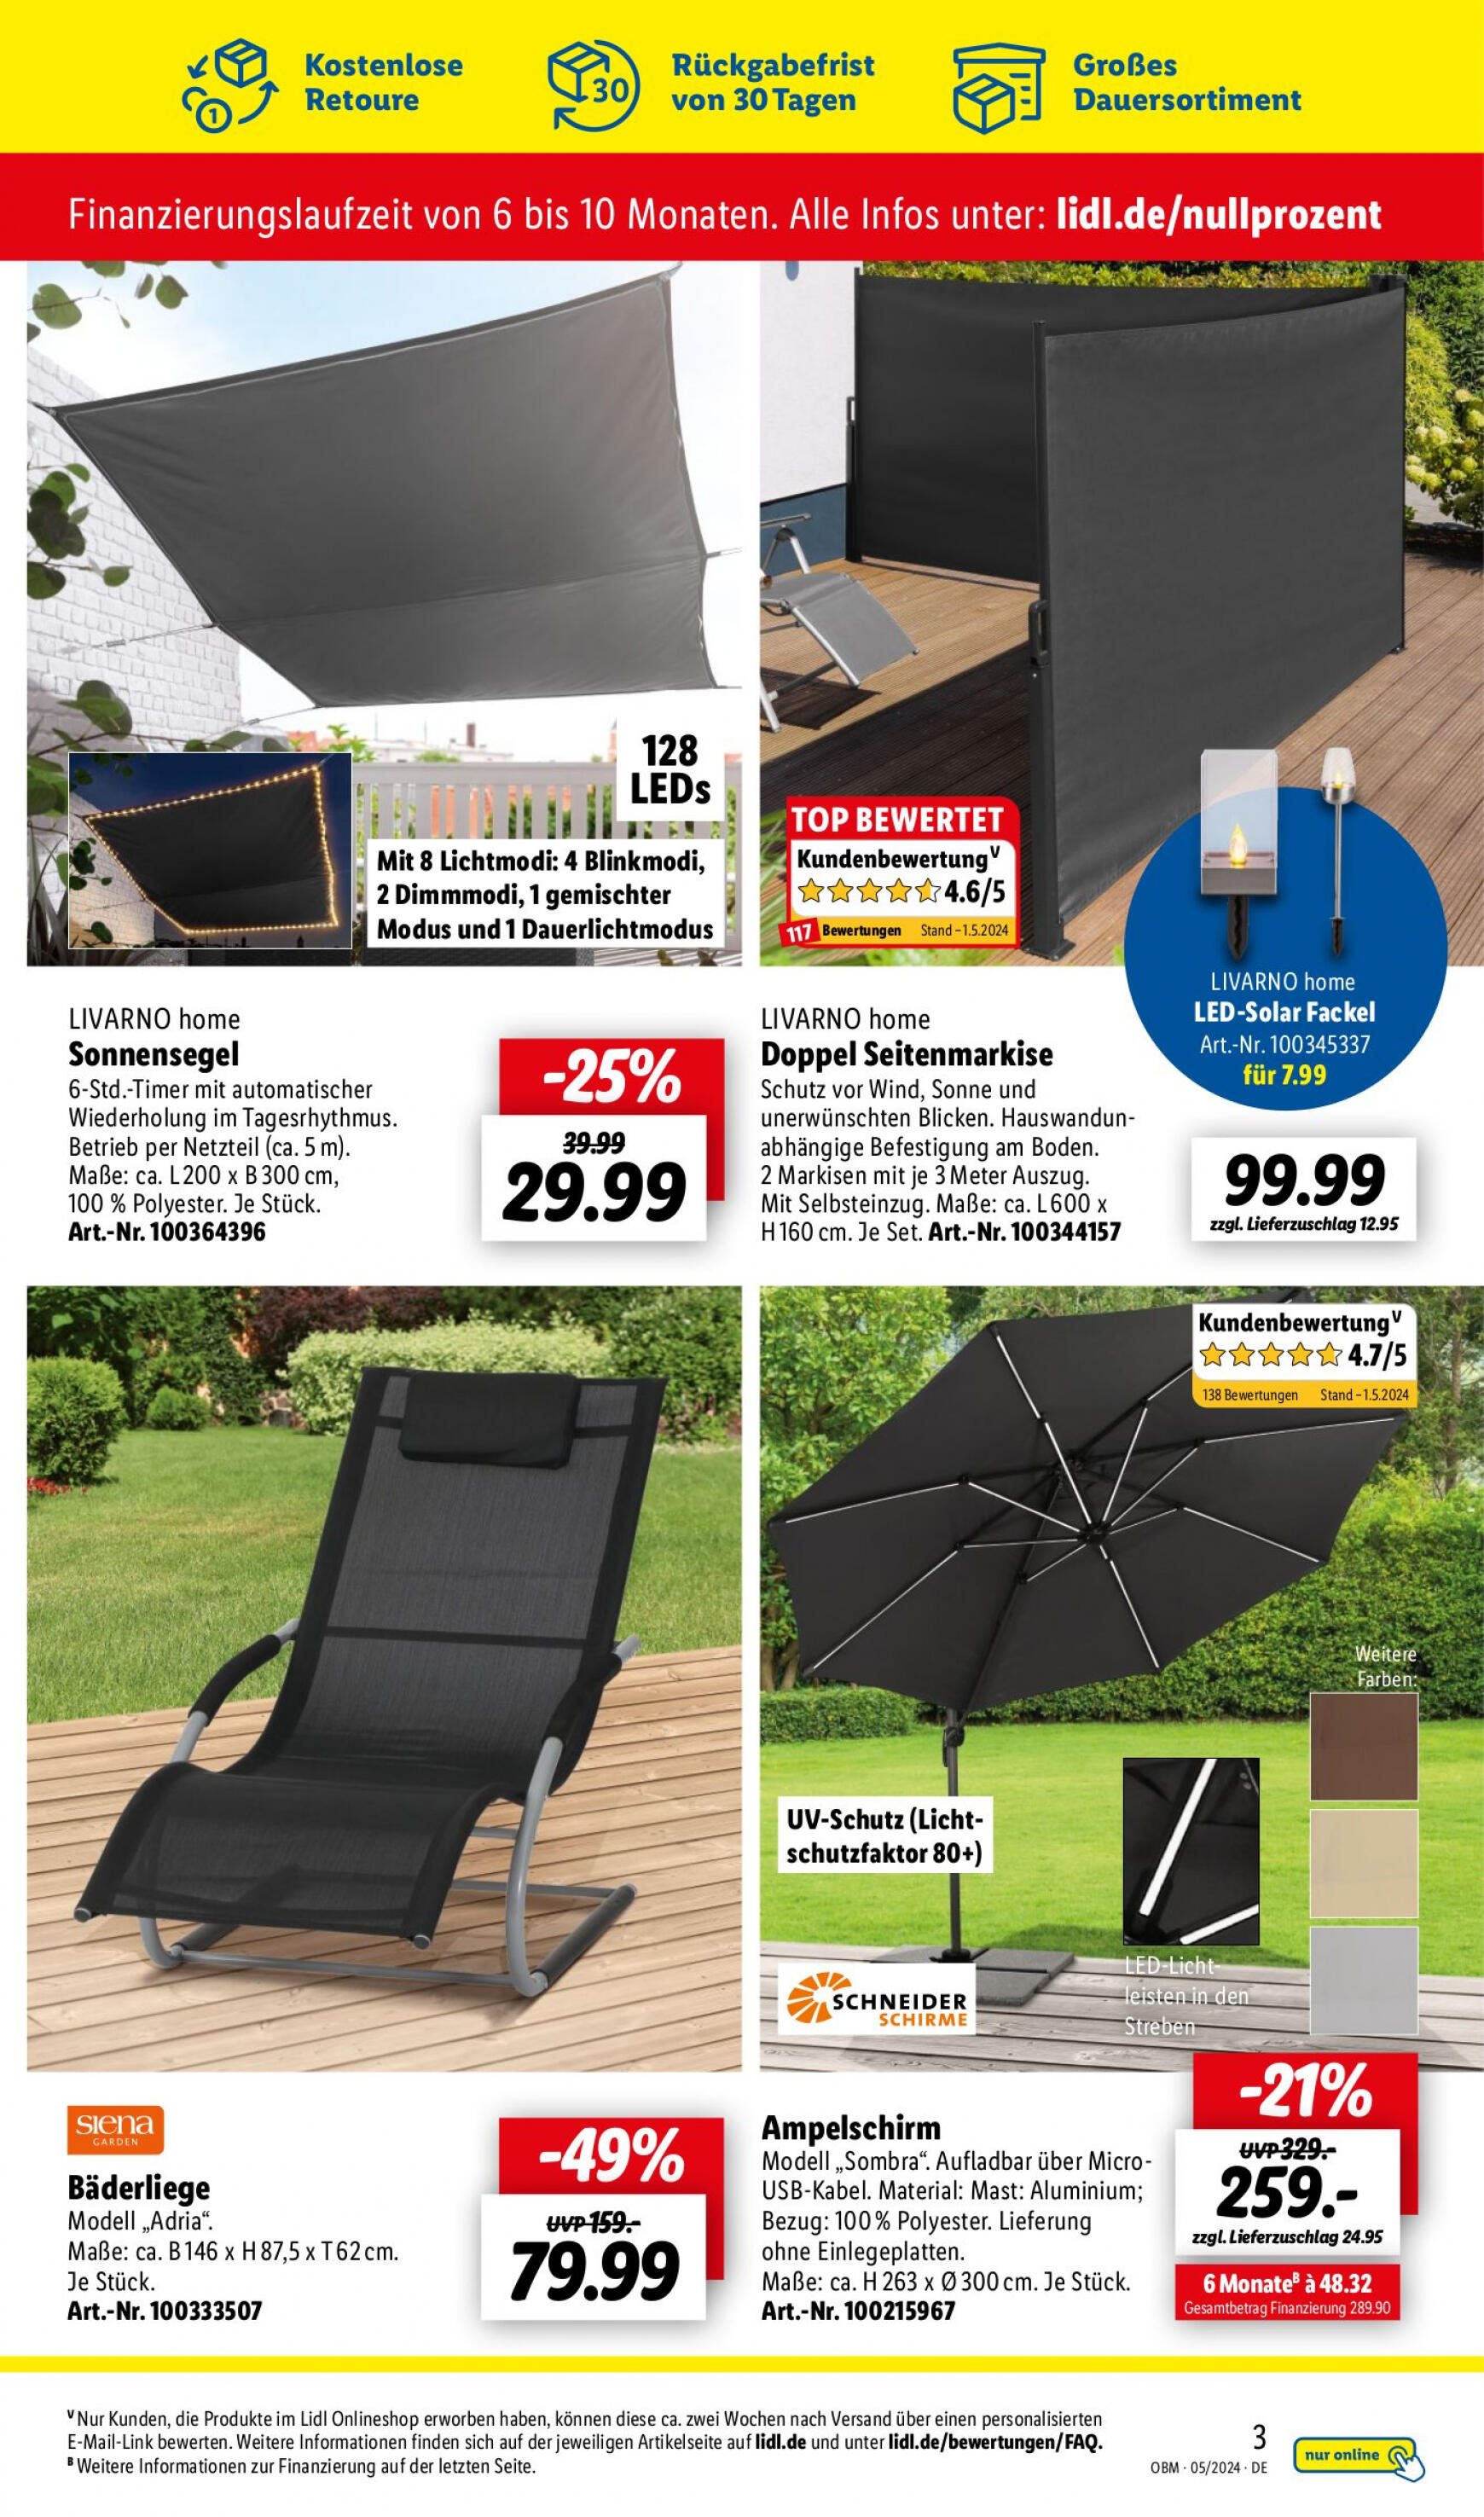 lidl - Flyer Lidl - Aktuelle Onlineshop-Highlights aktuell 01.05. - 31.05. - page: 3